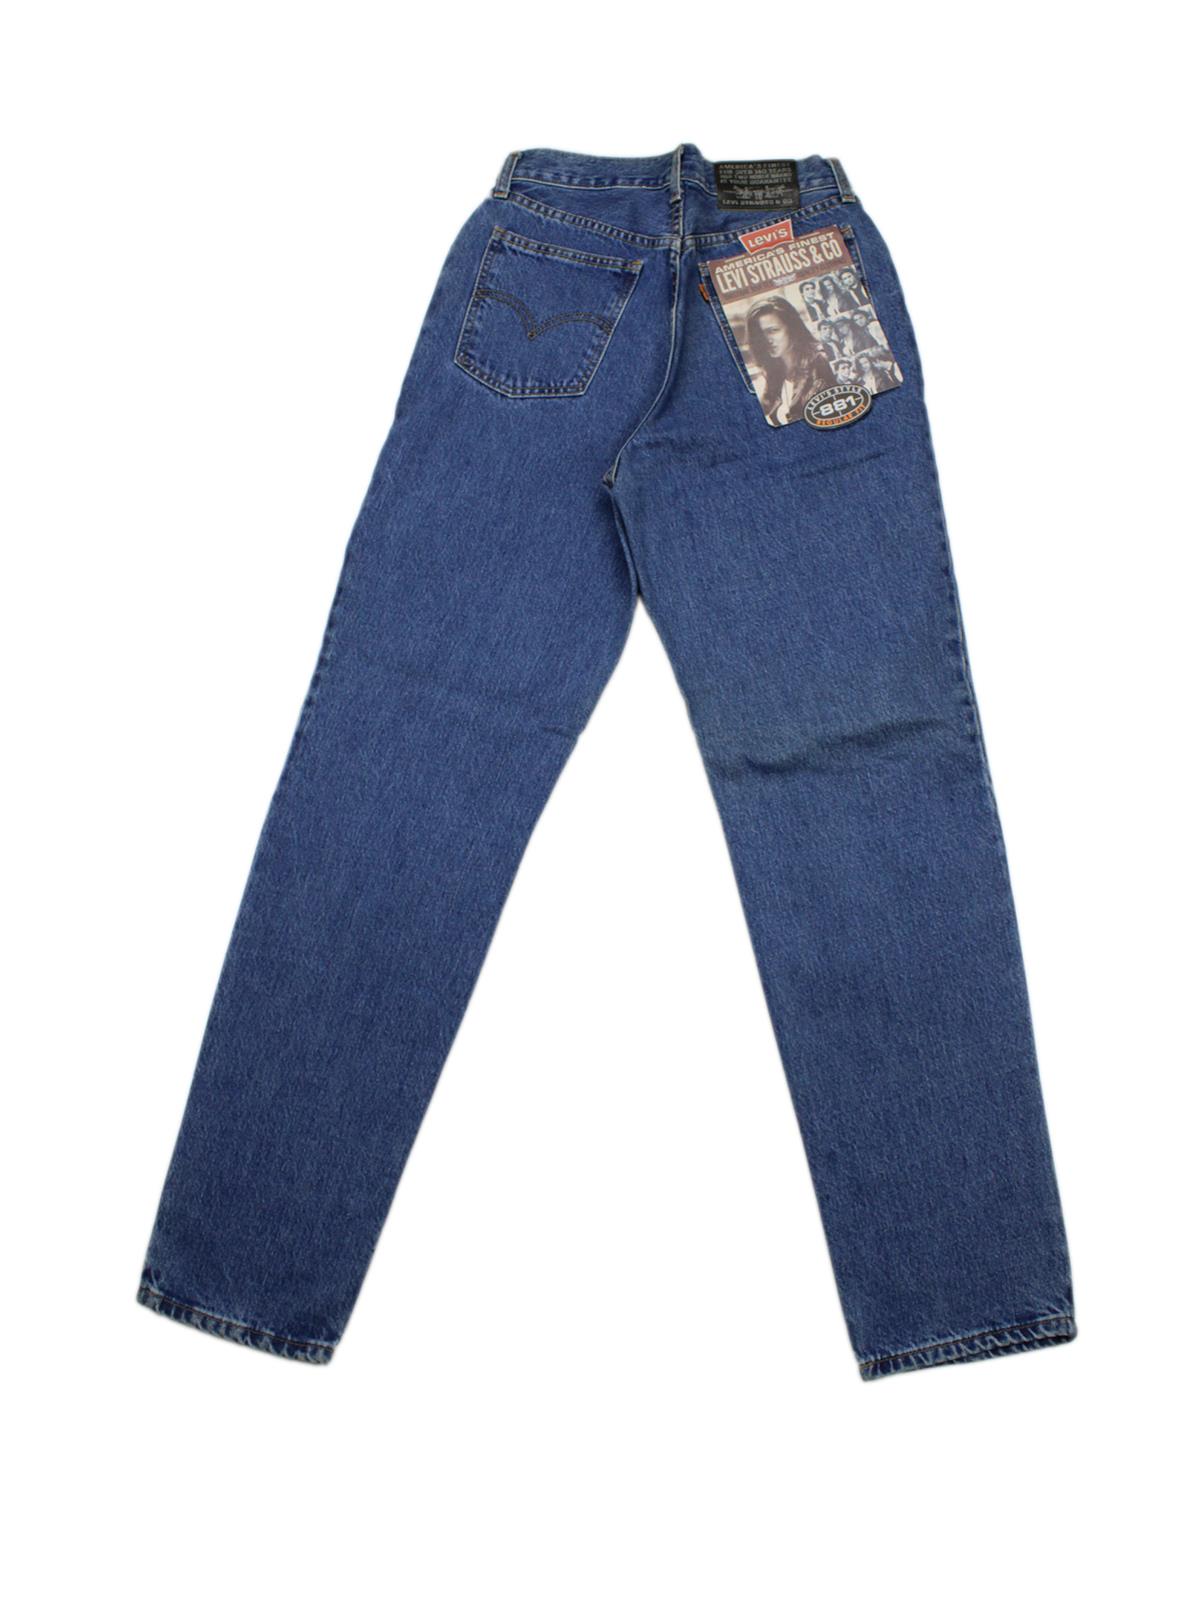 Disapproved animation solo LEVI'S 881 Jeans